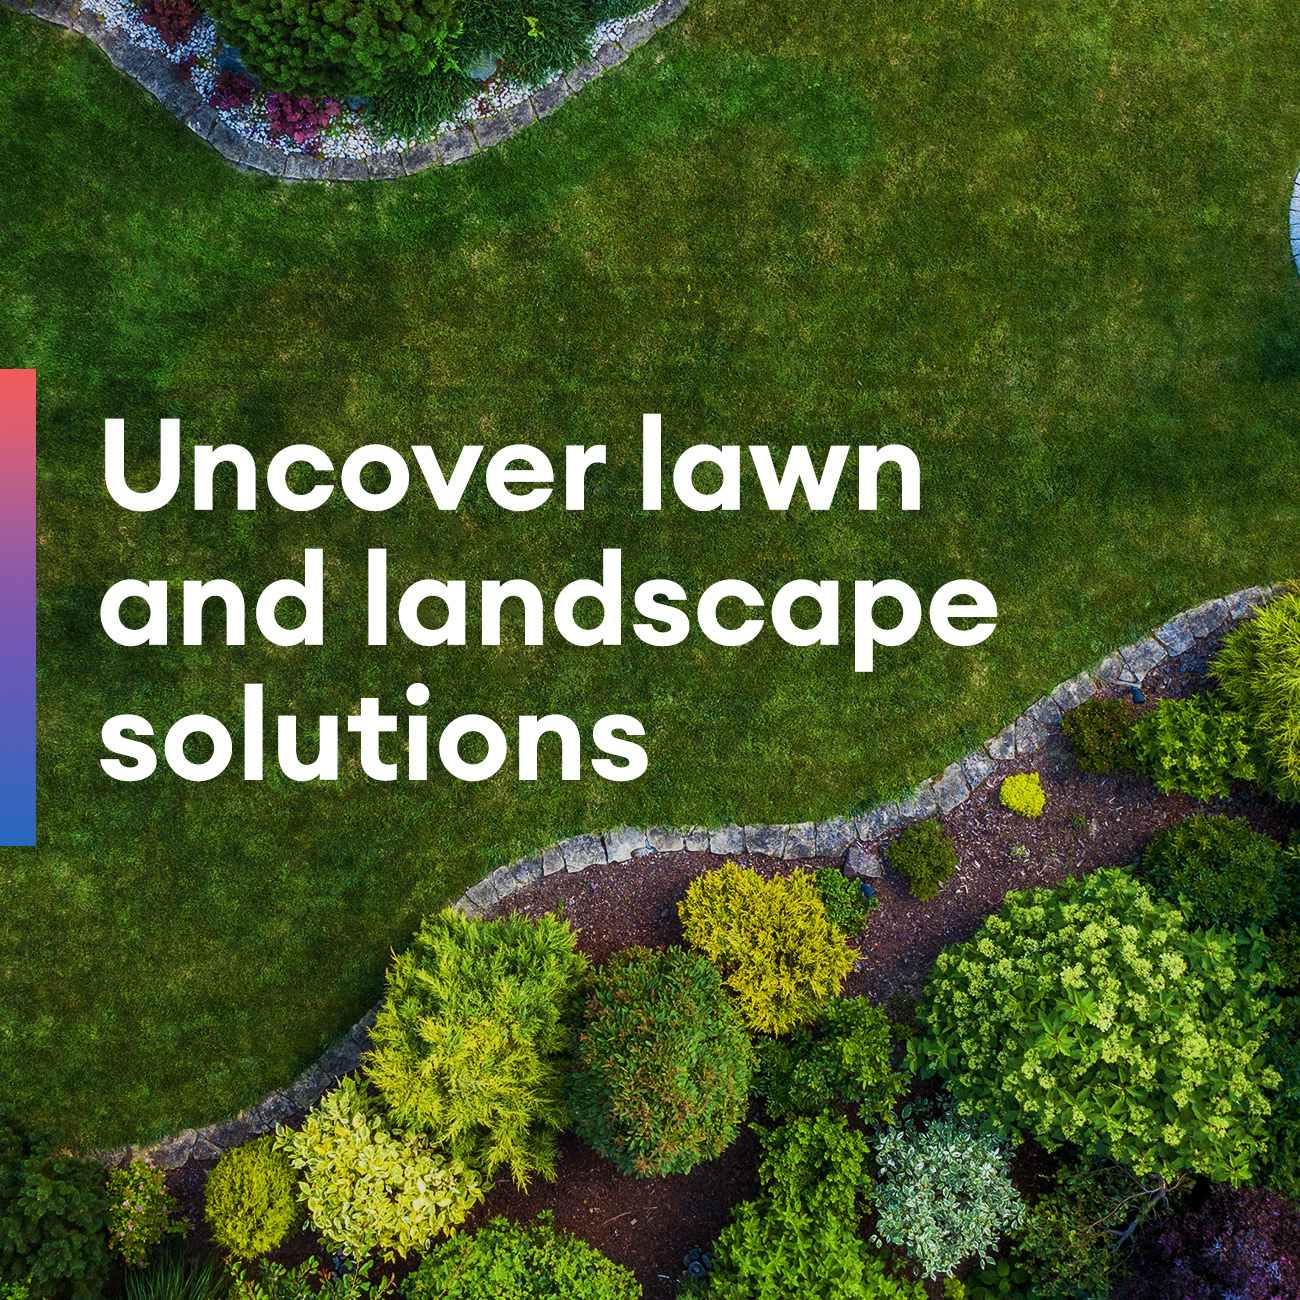 text Uncover lawn and landscape solutions image lawn from above